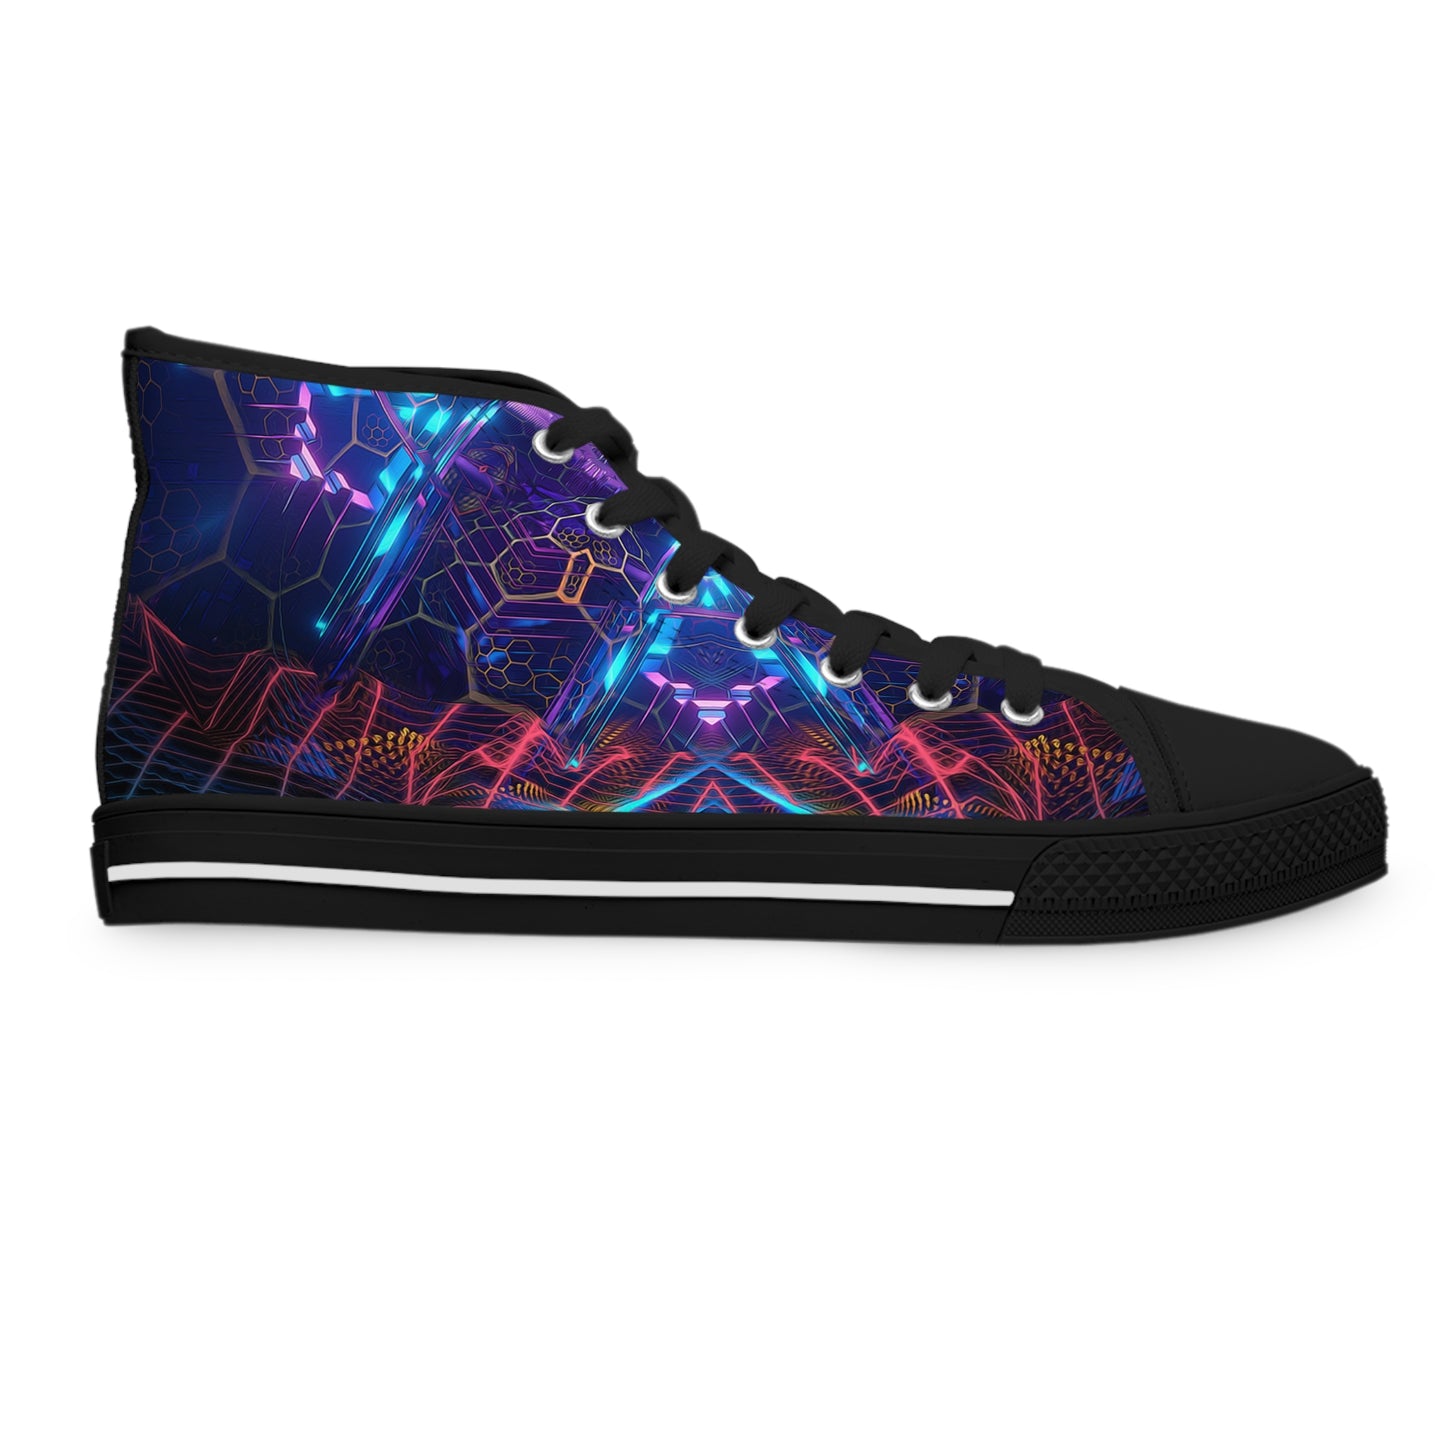 "ETH City V2" WOMEN'S HIGH TOP SNEAKERS